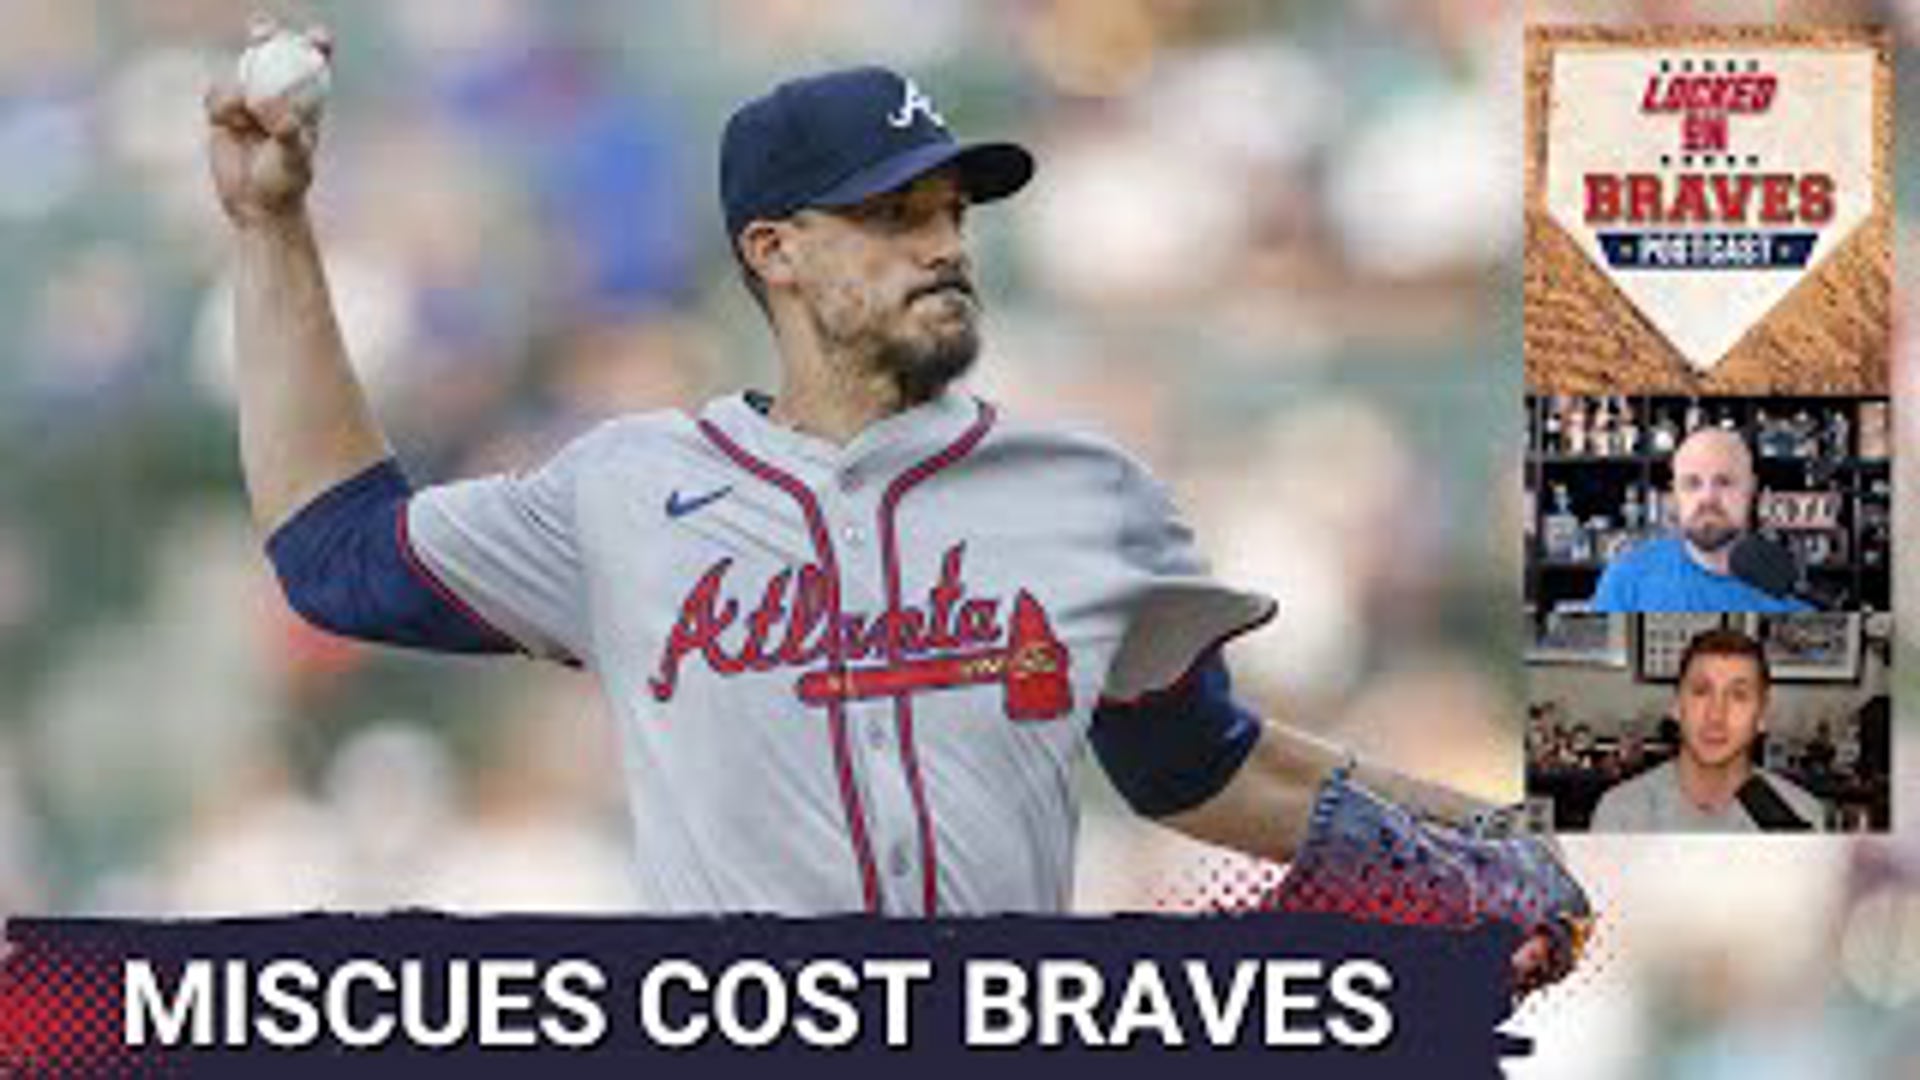 The Atlanta Braves made some costly mistakes and could not cash in on their chances with runners on base in a 4-3 extra-innings defeat at the hands of the Cubs.